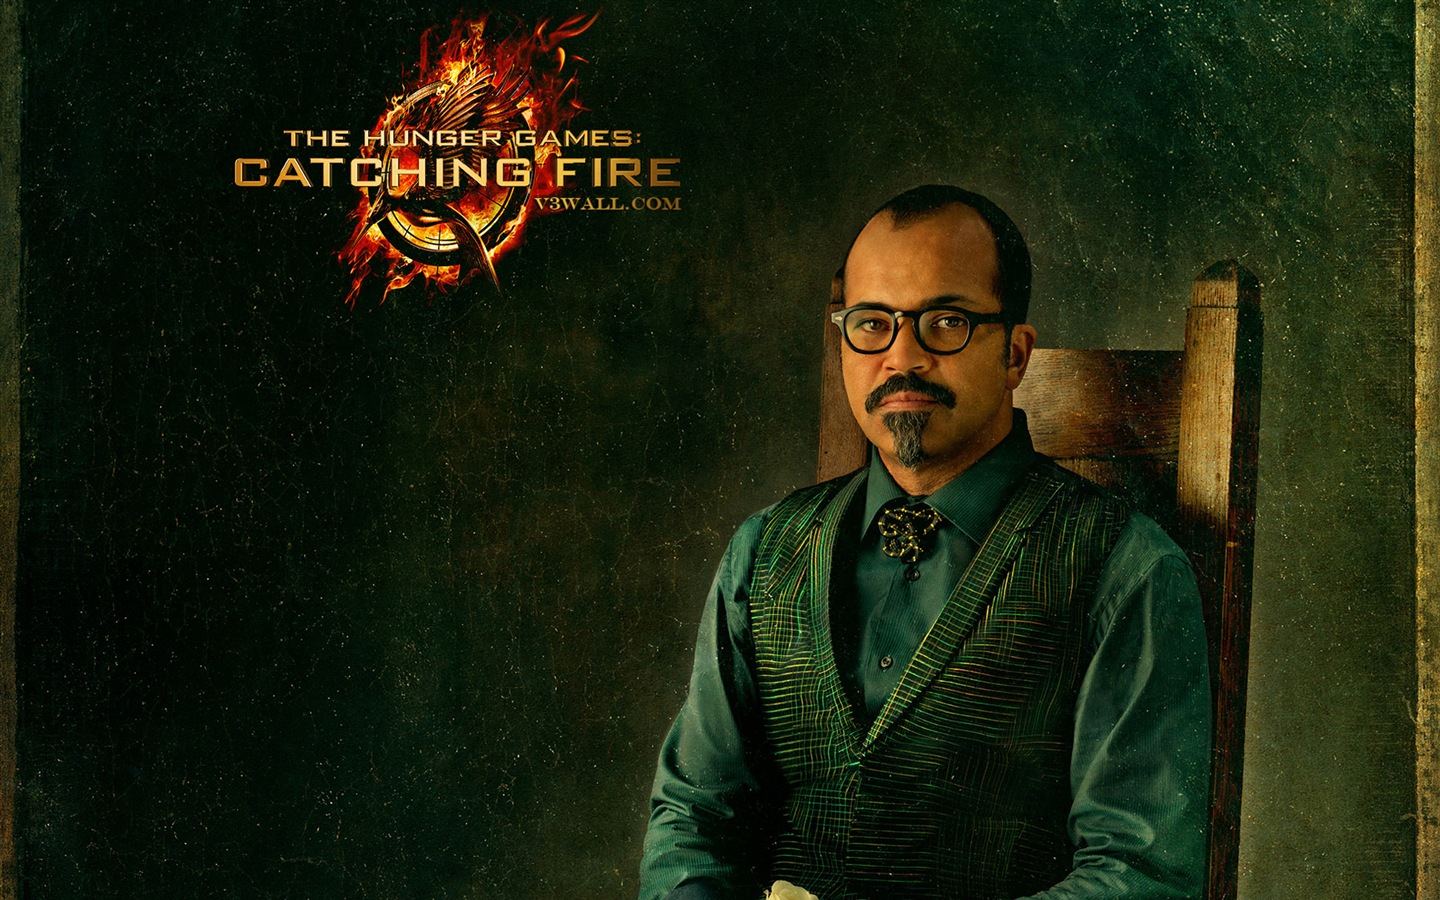 The Hunger Games: Catching Fire wallpapers HD #14 - 1440x900